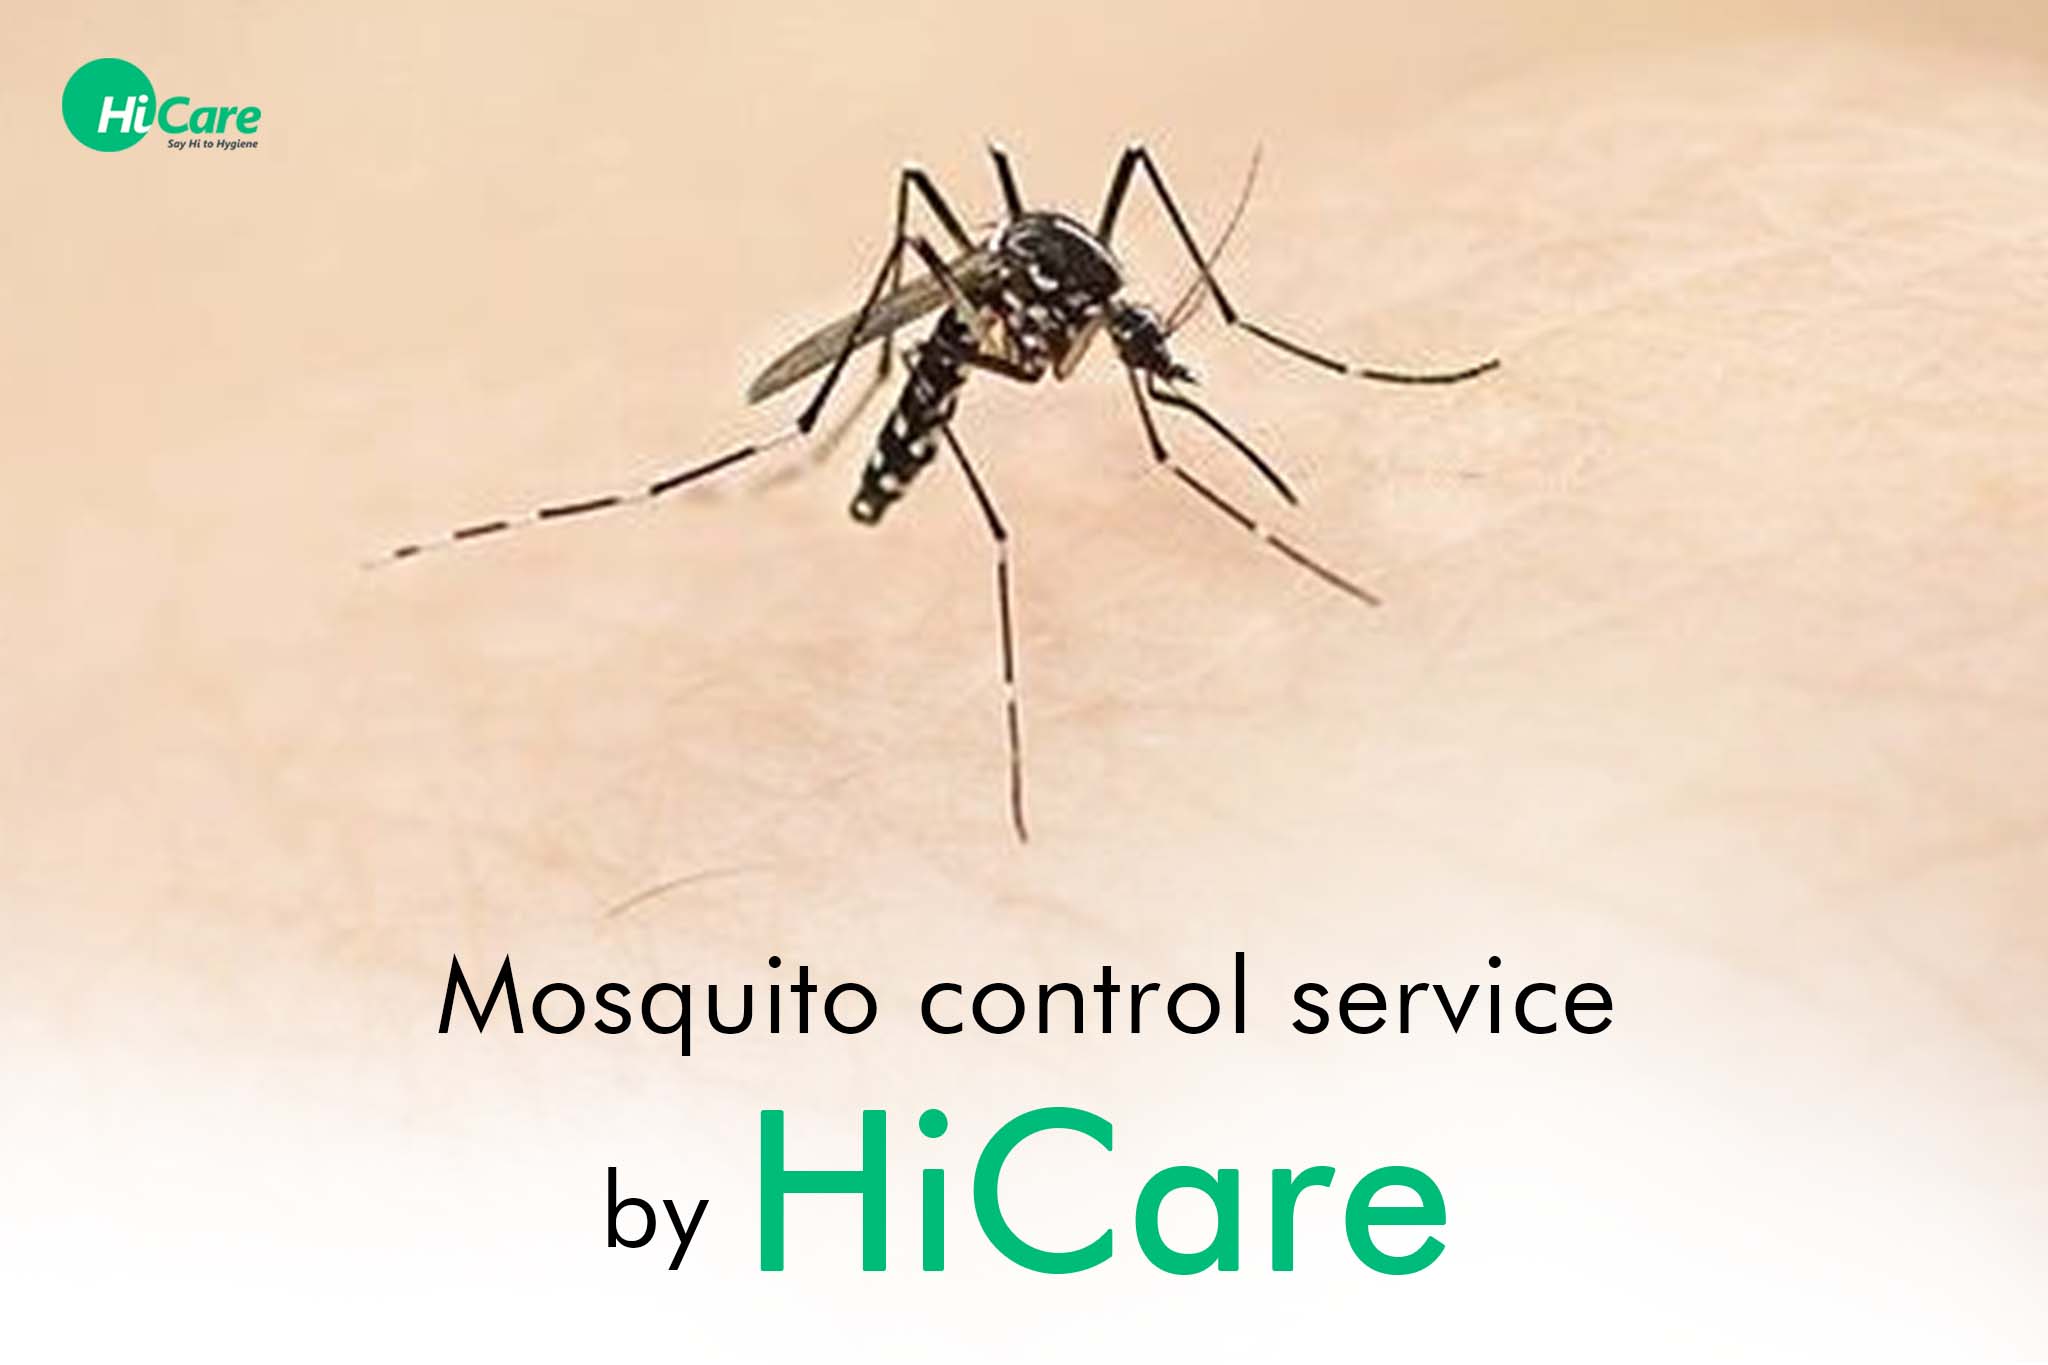 3X Mosquito Control Treatment: Best Mosquito Solution for Home by HiCare